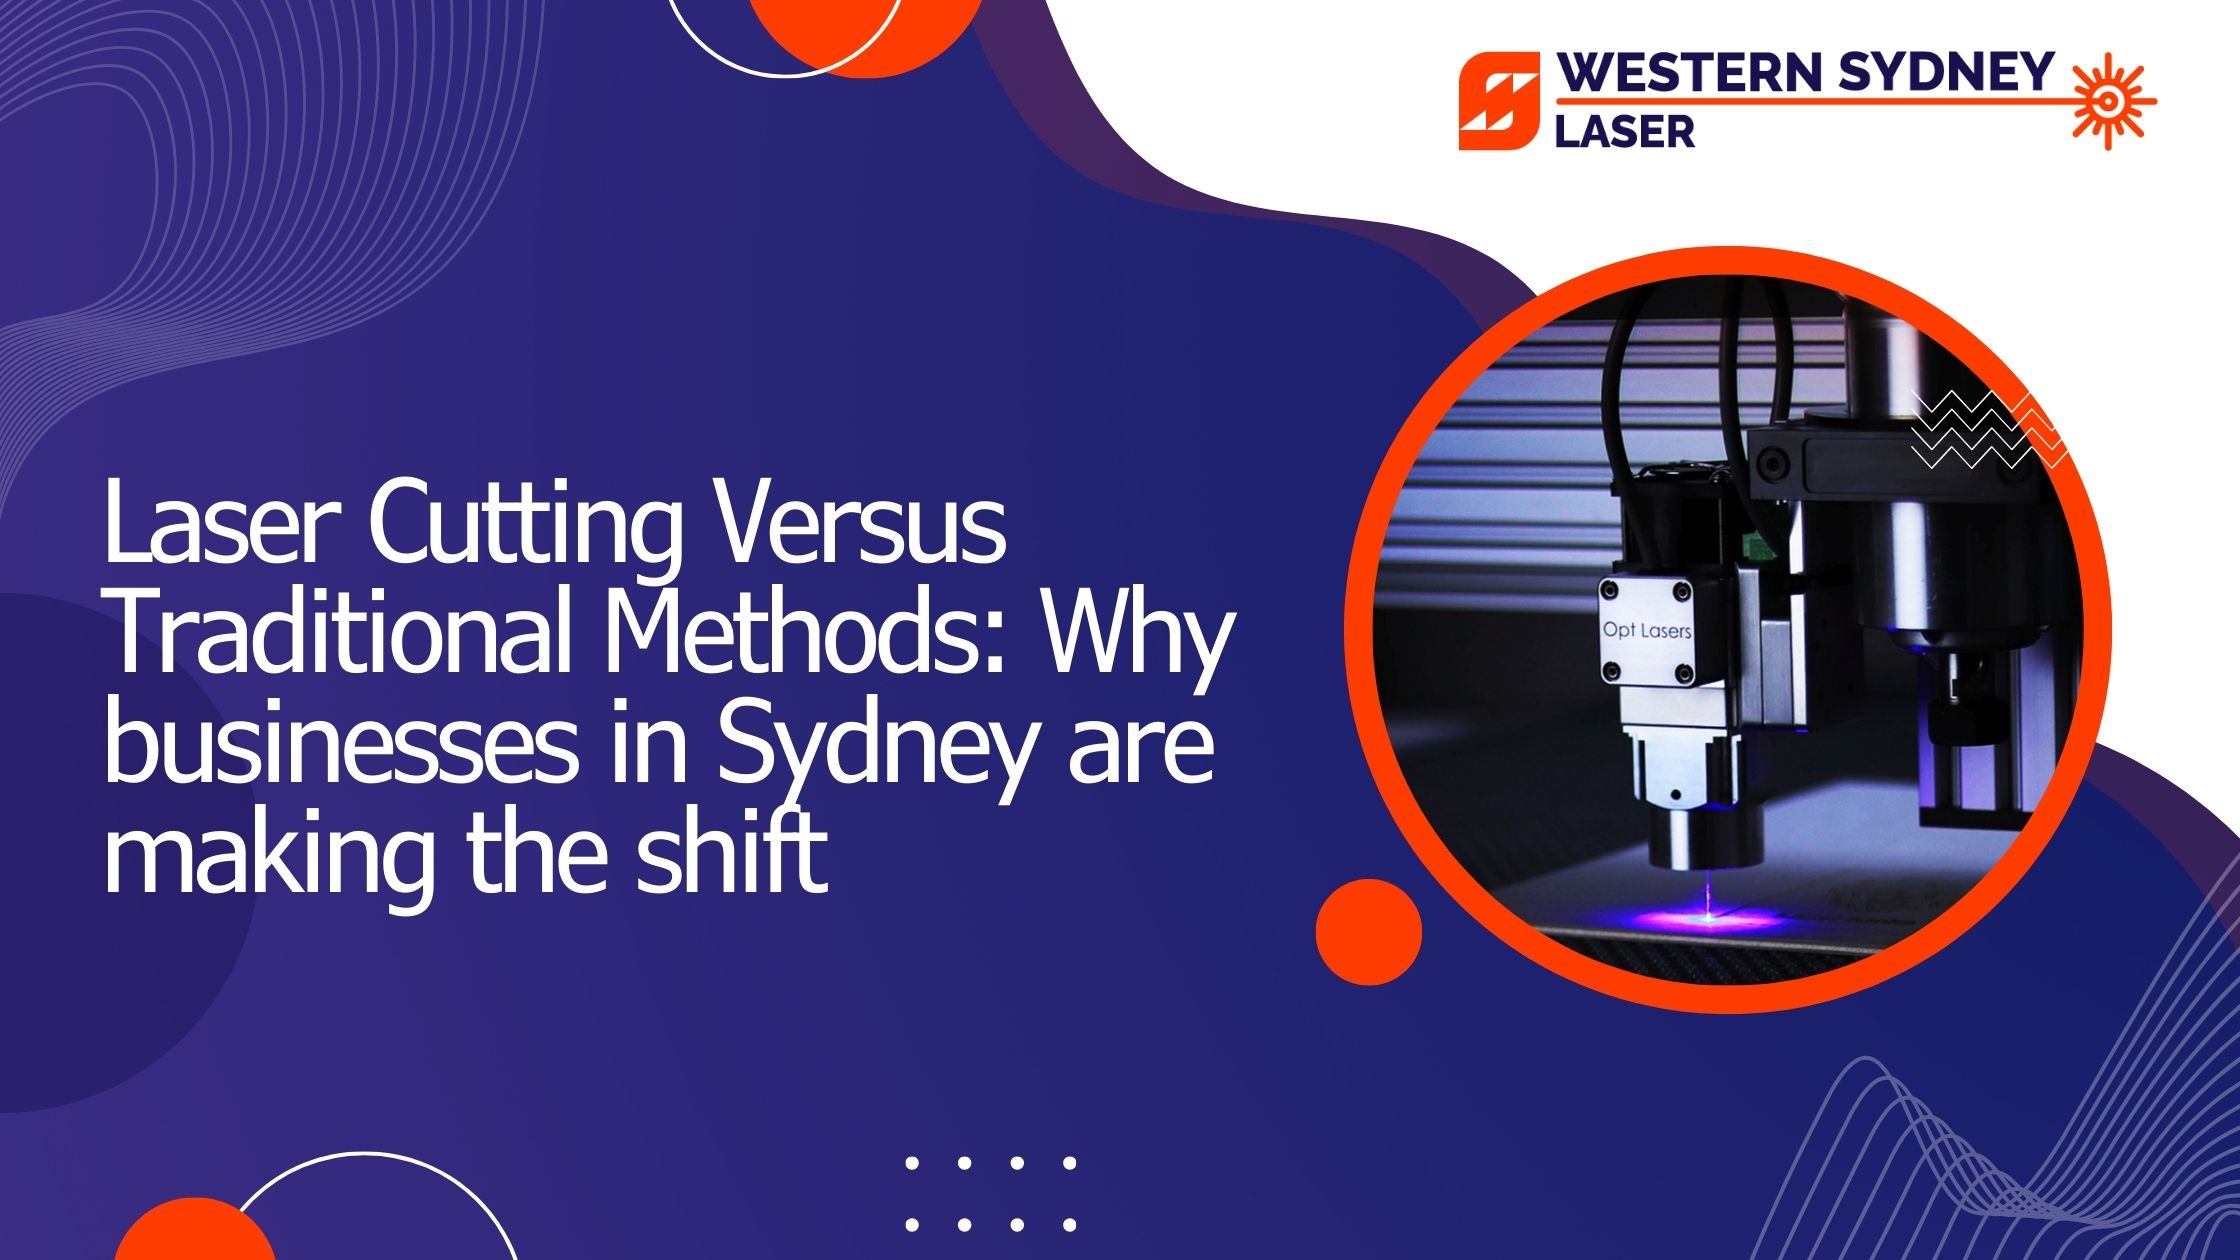 Laser Cutting Versus Traditional Methods: Why businesses in Sydney are making the shift